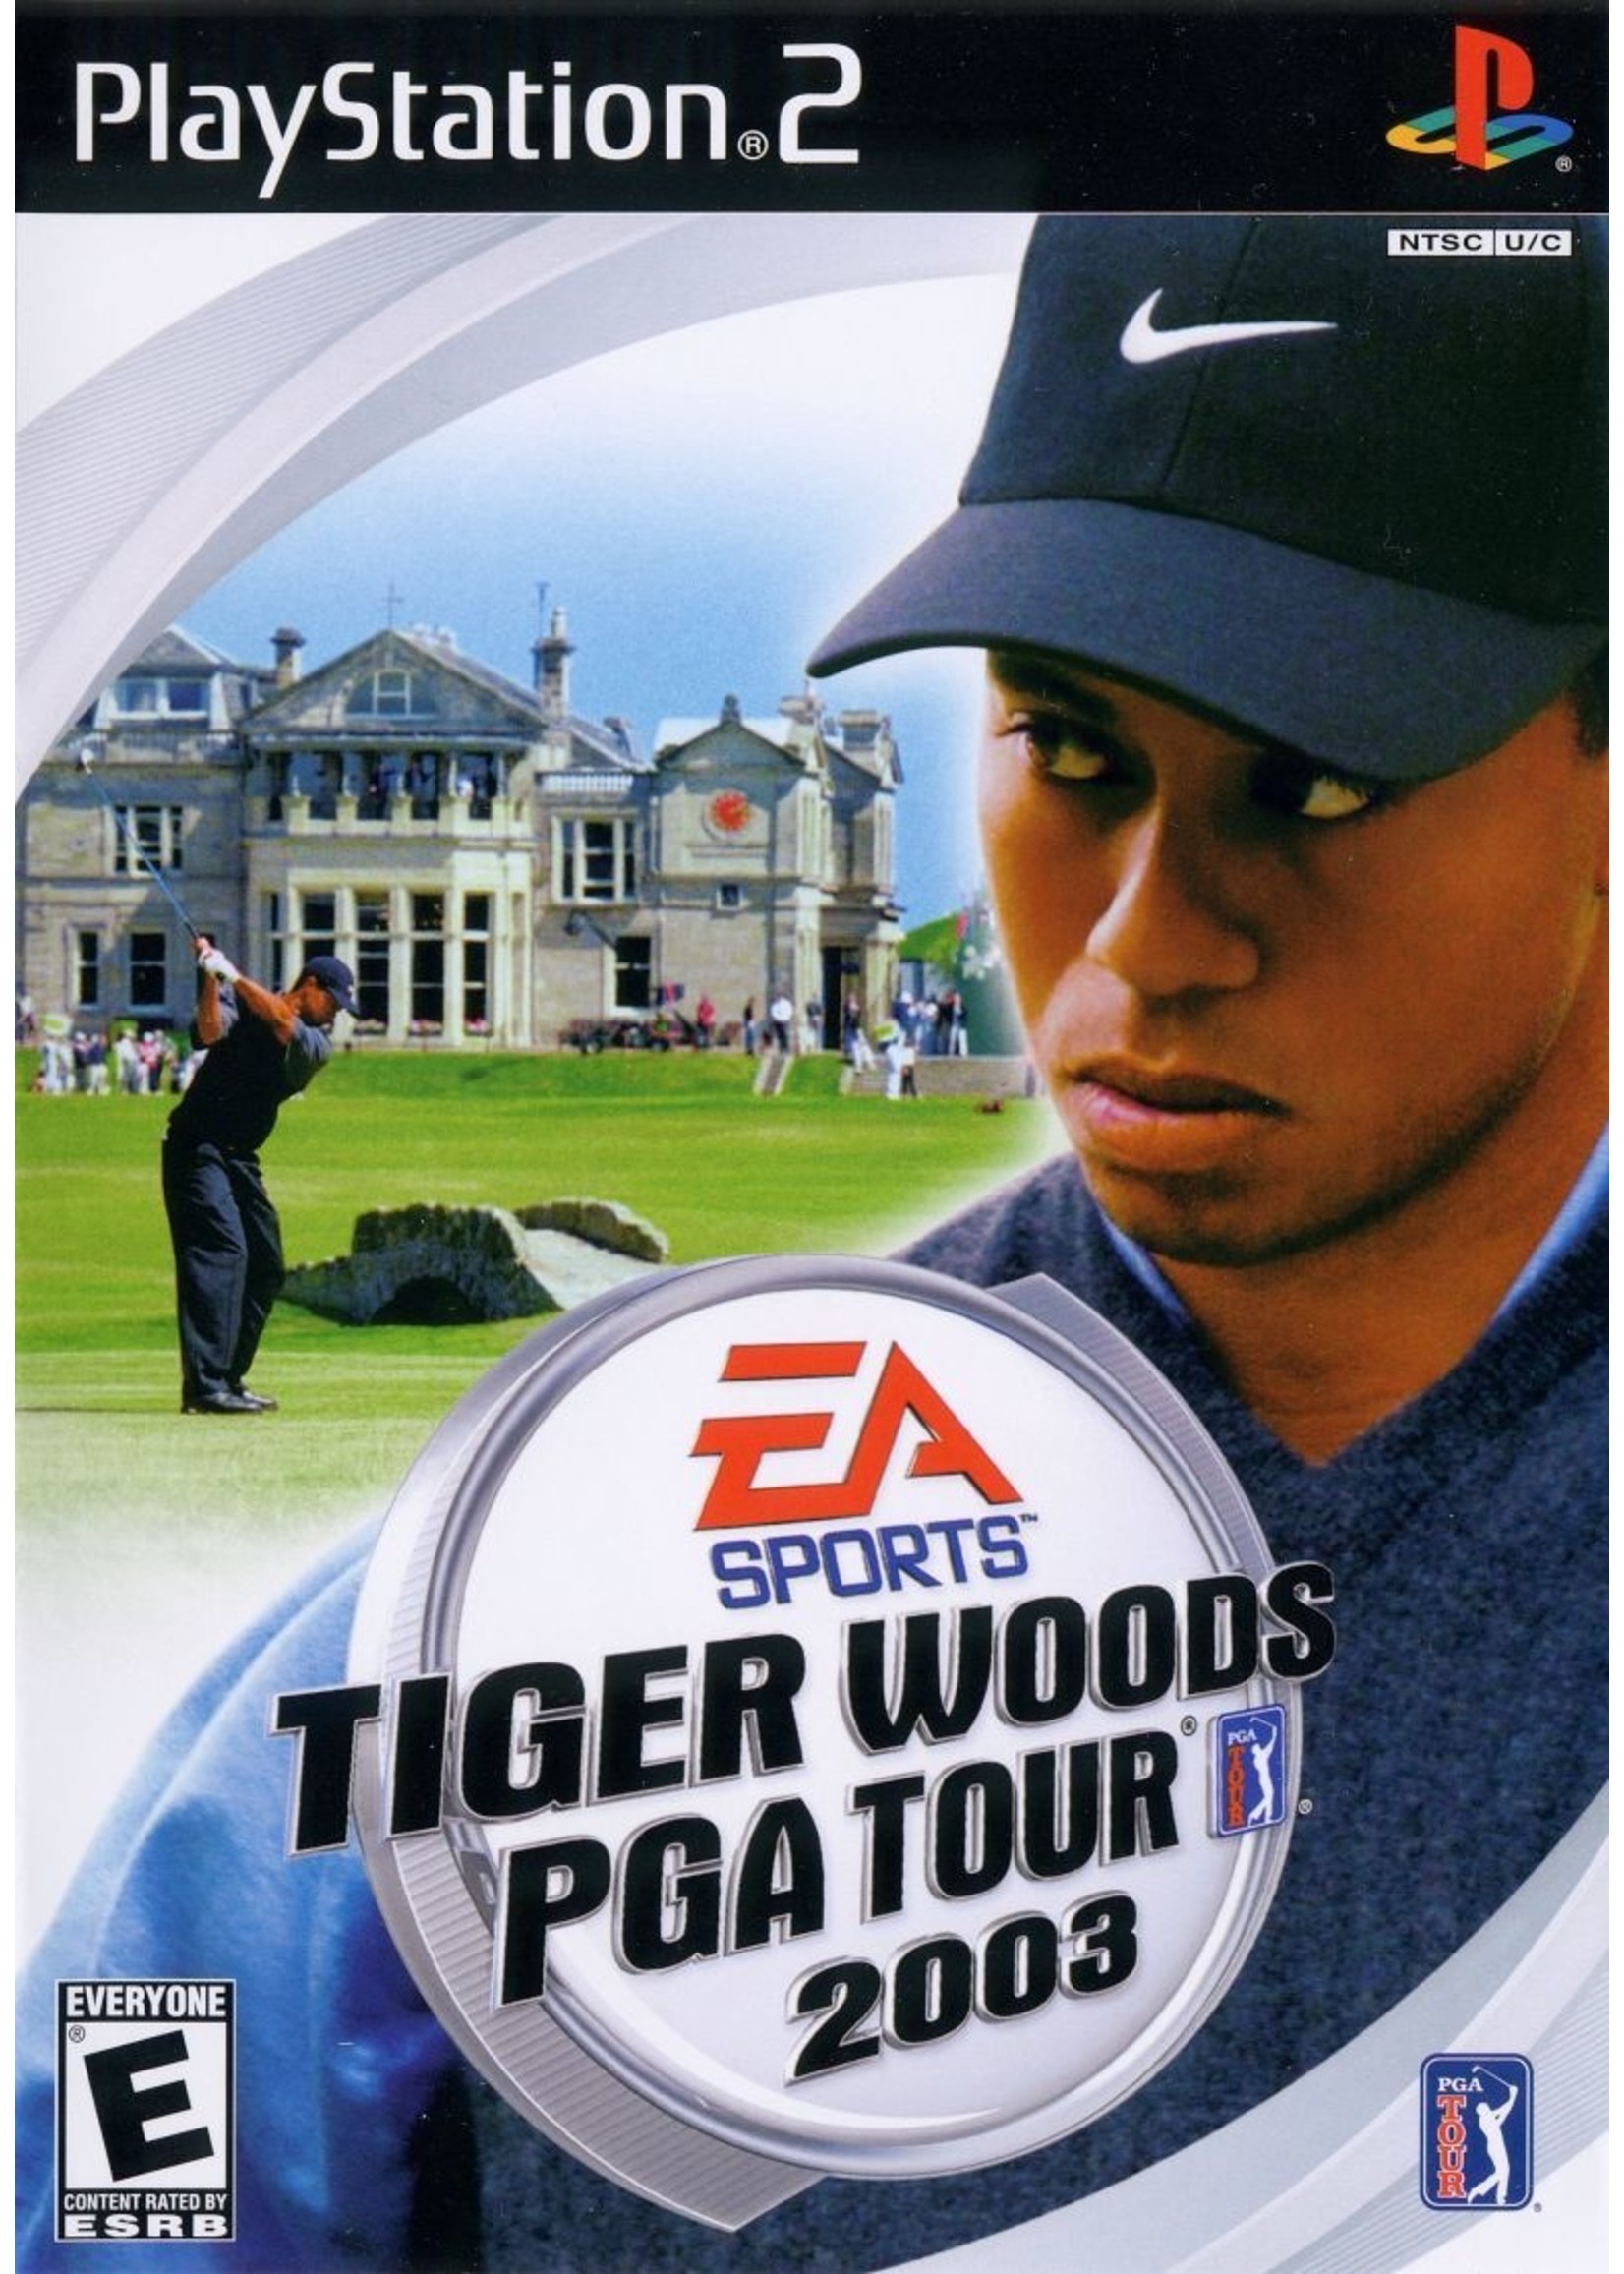 Sony Playstation 2 (PS2) Tiger Woods PGA Tour 2003